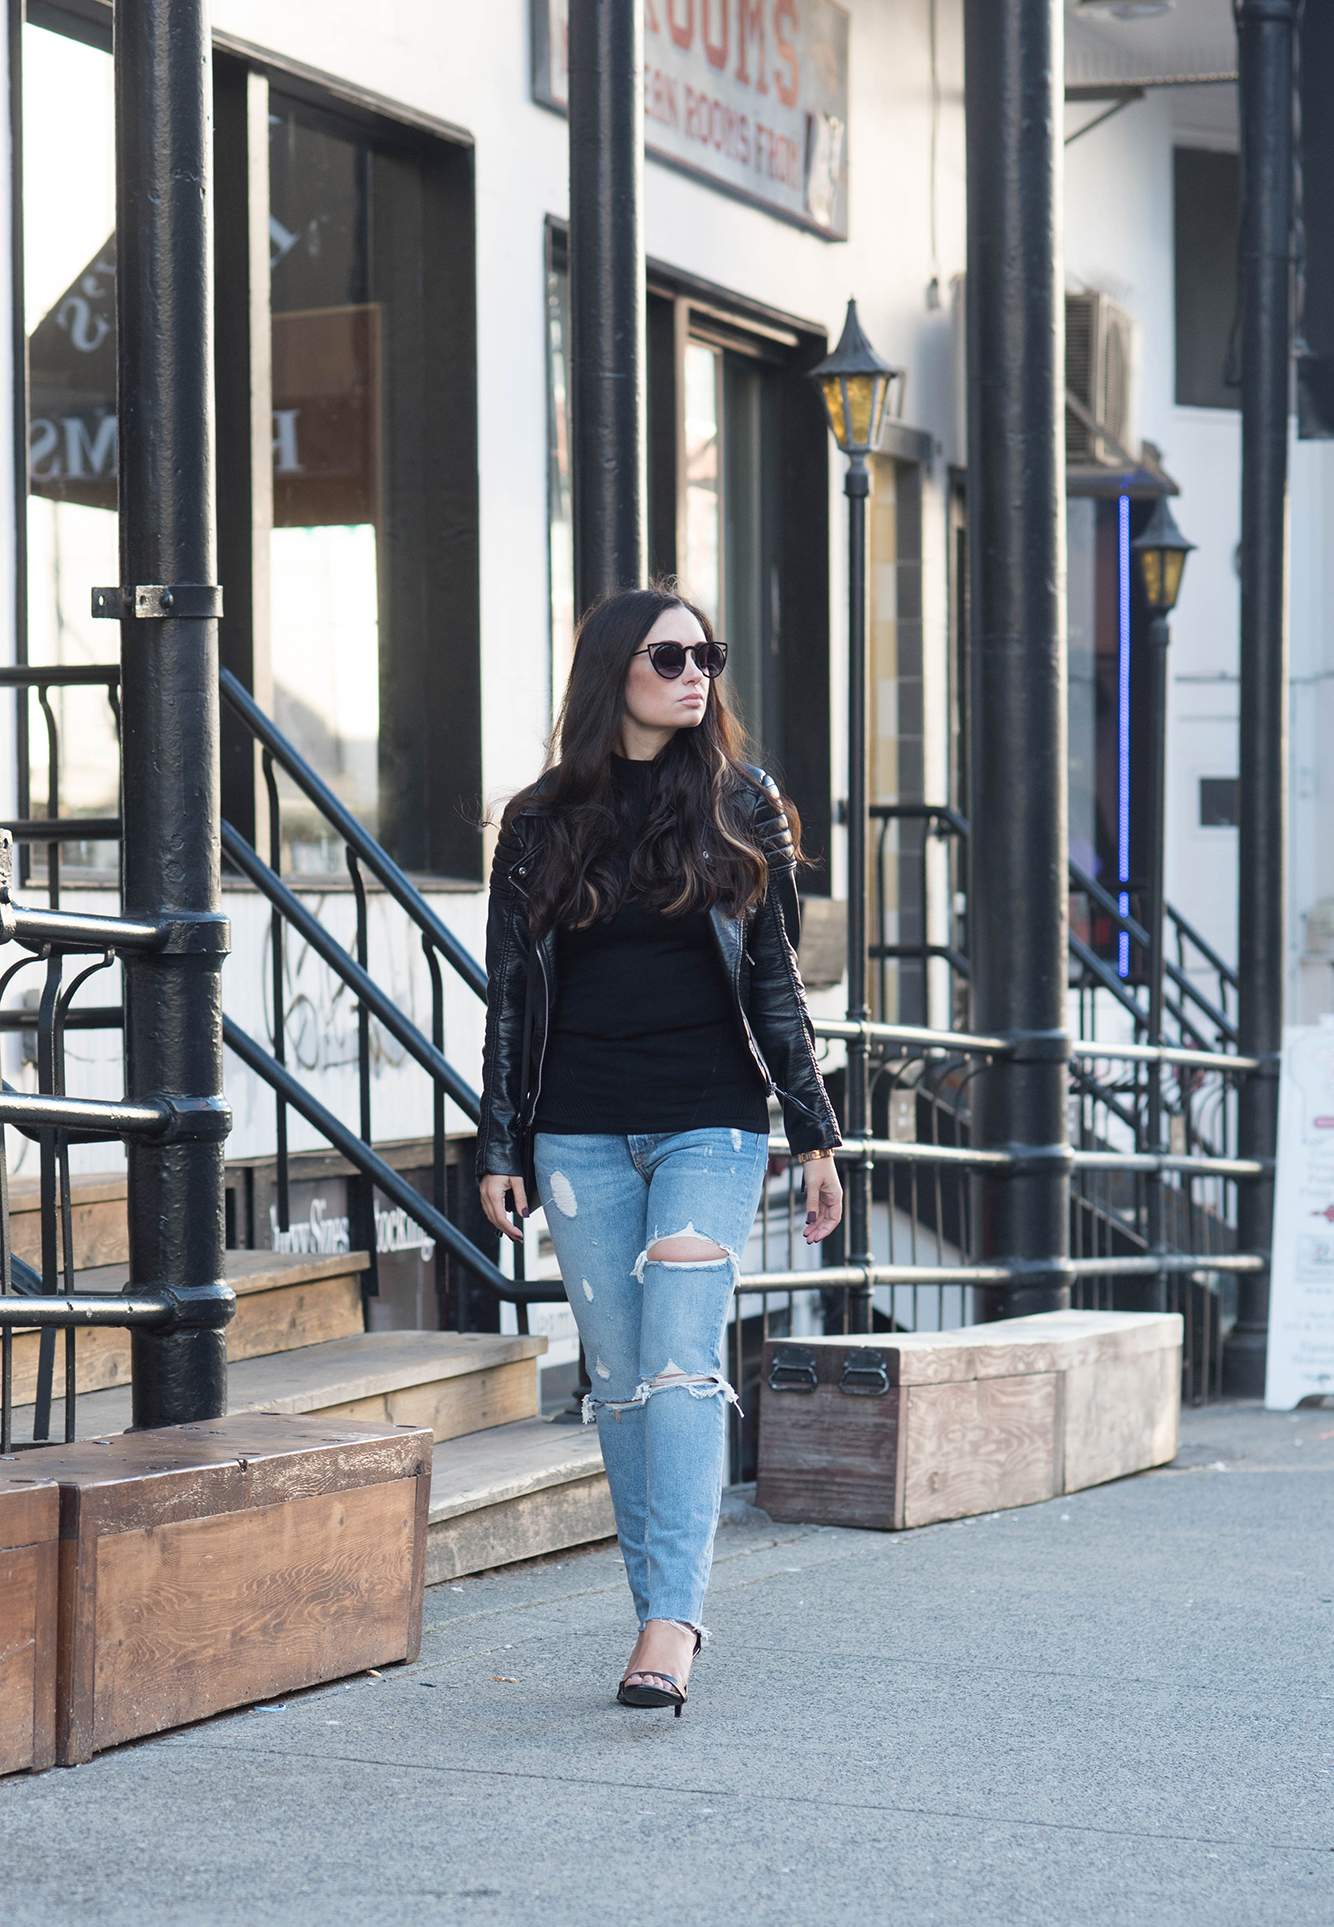 coco-and-vera-top-vancouver-style-blog-top-canadian-style-blog-top-blogger-street-style-revolve-me-grlfrnd-jeans-le-chateau-top-steve-madden-sandals-hm-jacket